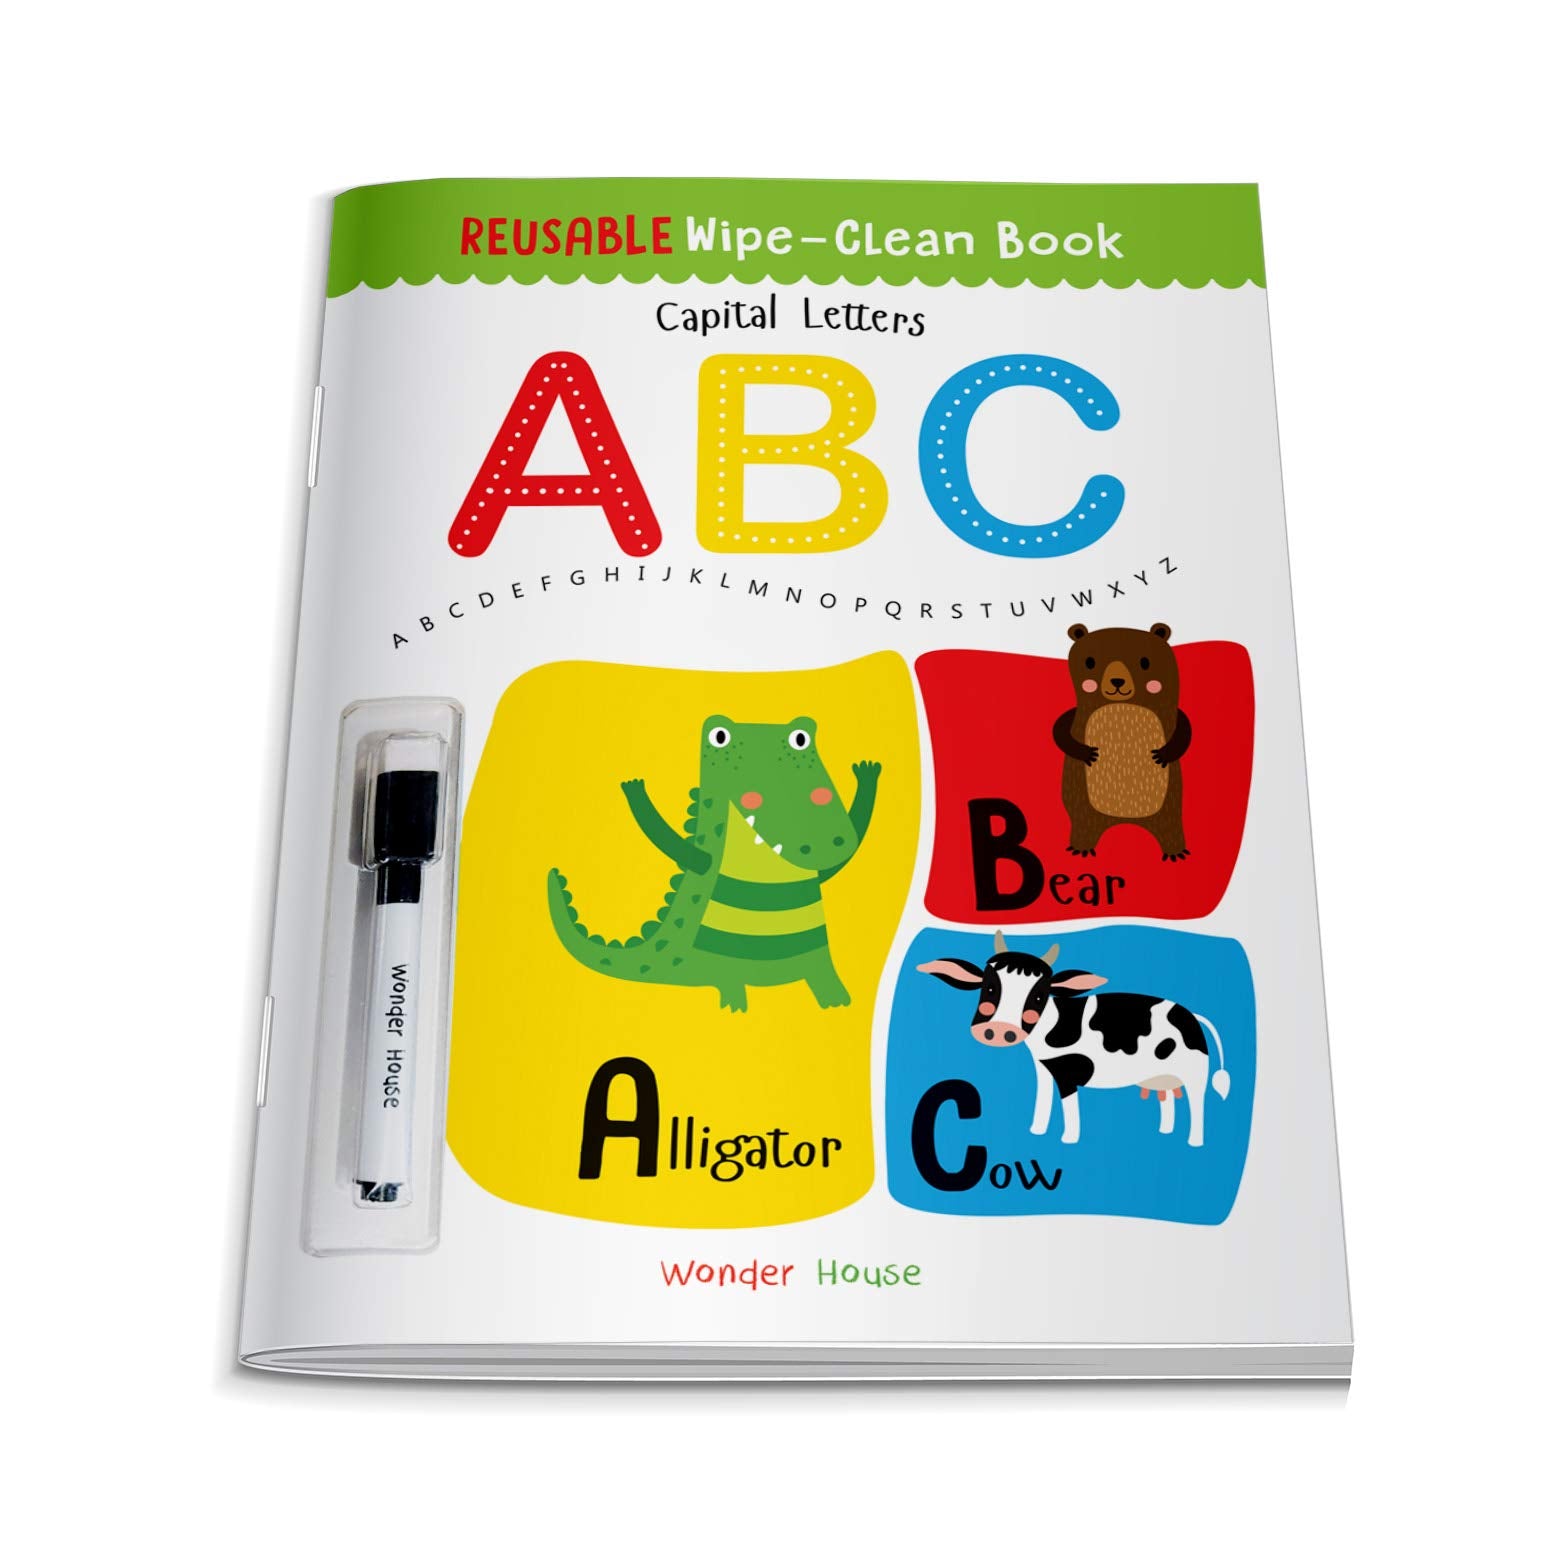 Reusable Wipe And Clean Book - Capital Letters : Write And Practice Capital Letters